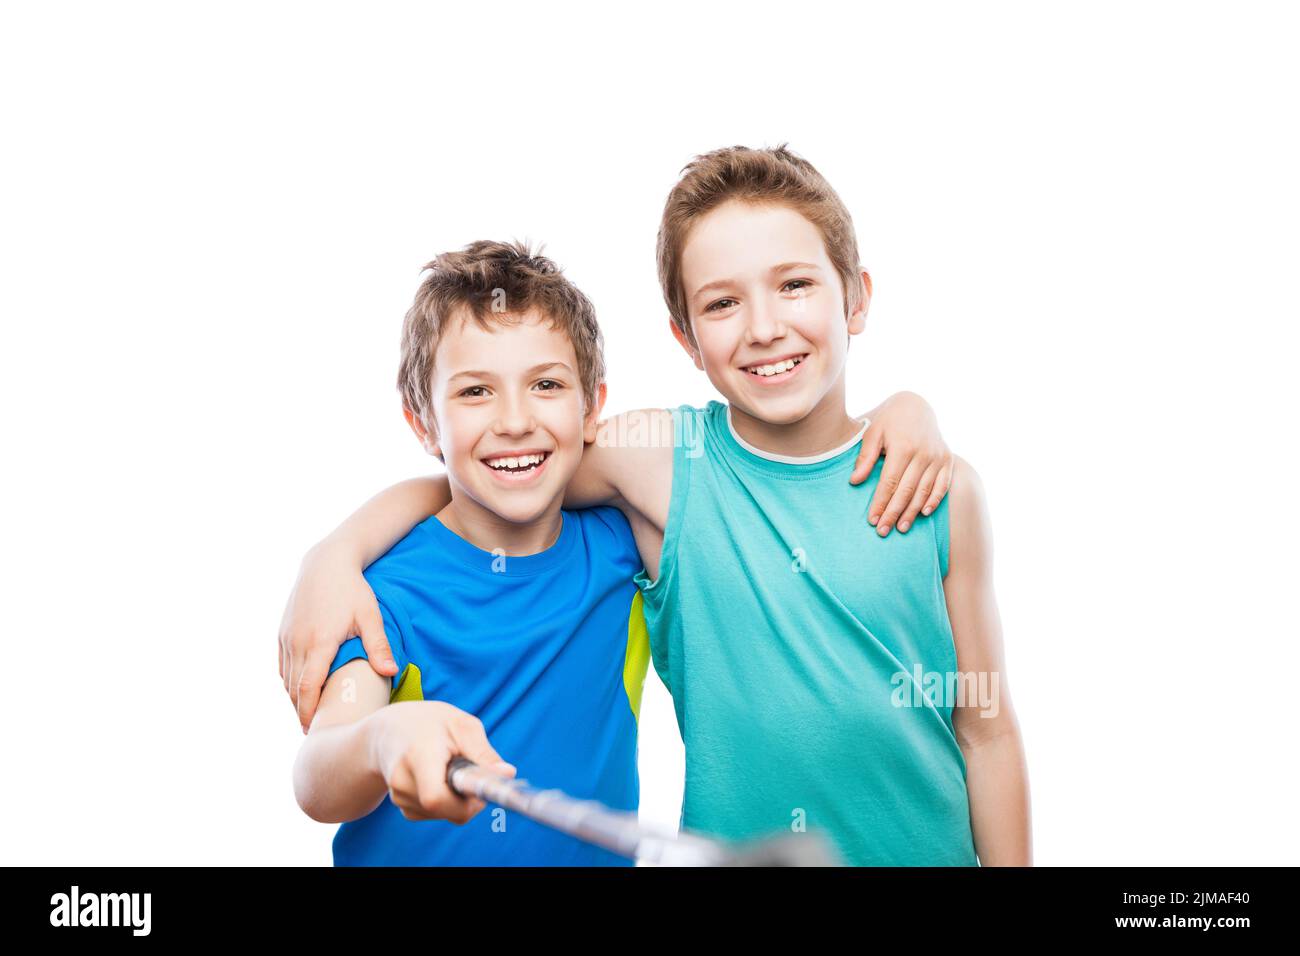 Two smiling child boy brothers holding mobile phone or smartphone selfie stick taking portrait photo Stock Photo